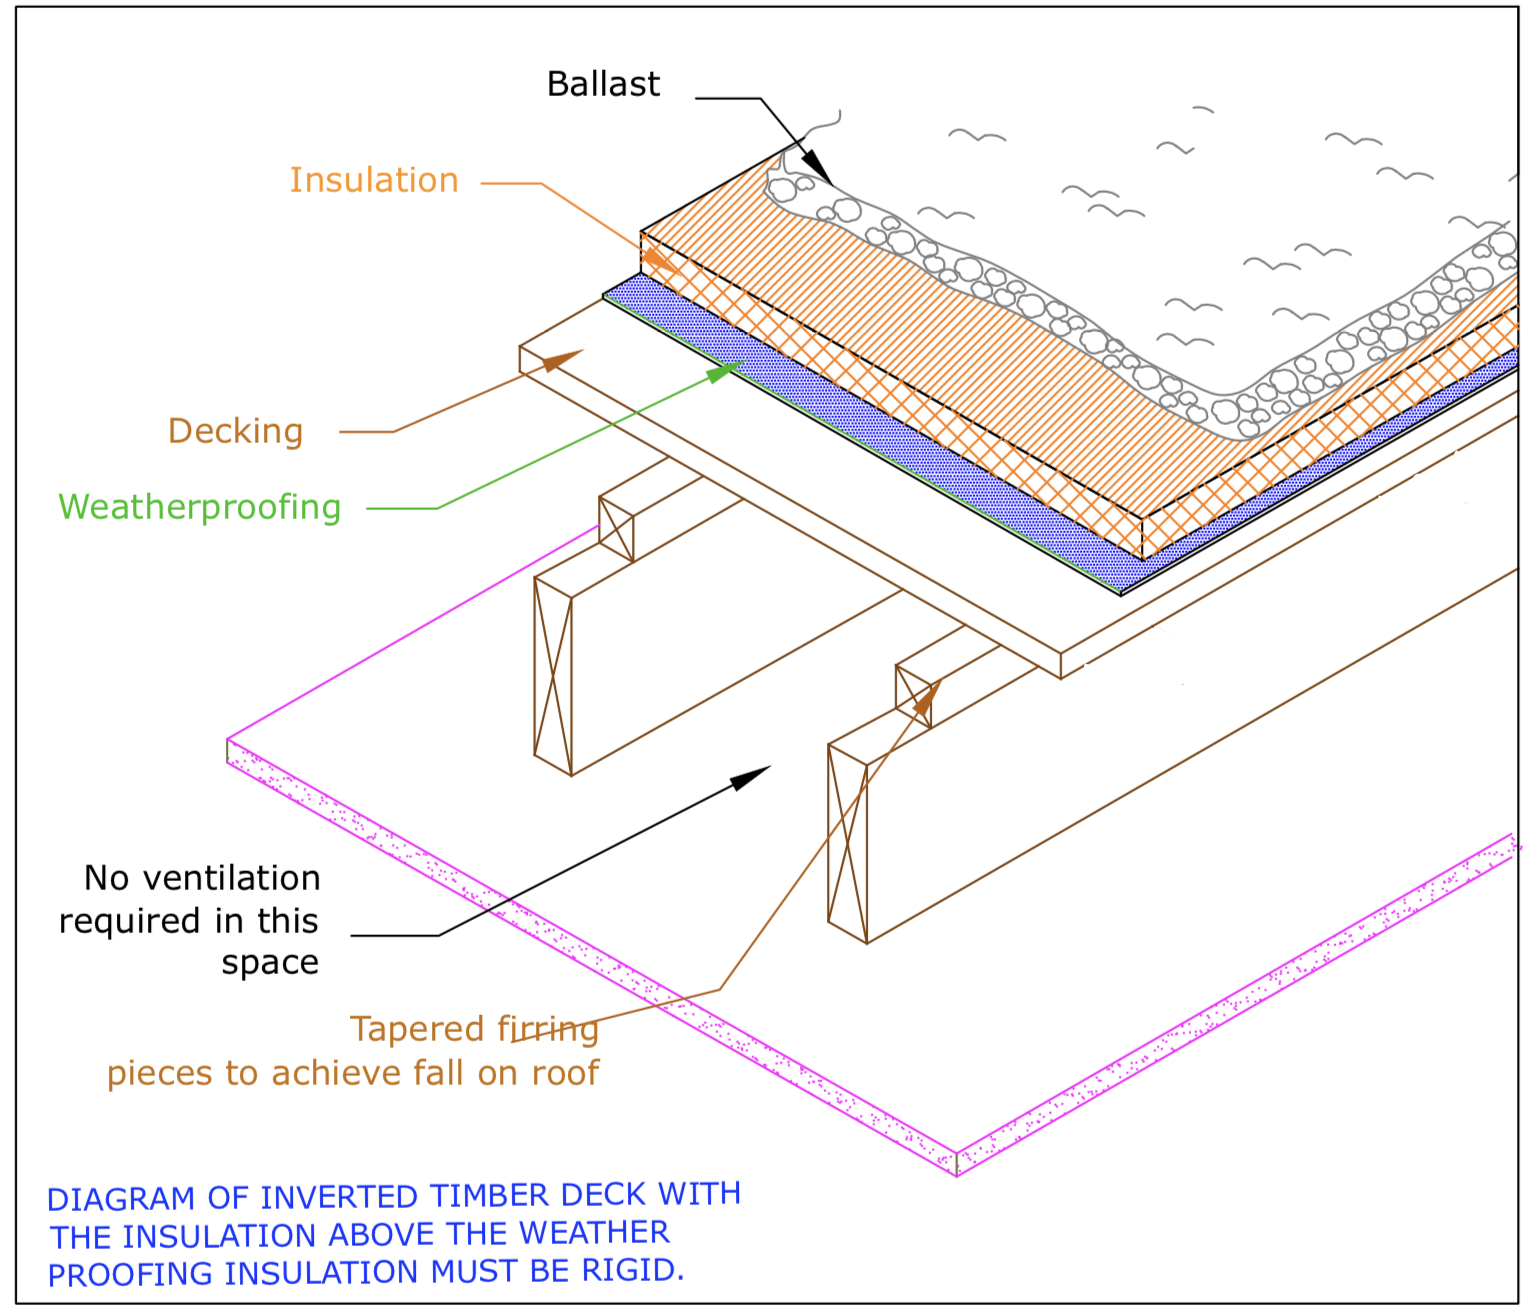 Diagram D74 - Typical inverted timber deck roof detail